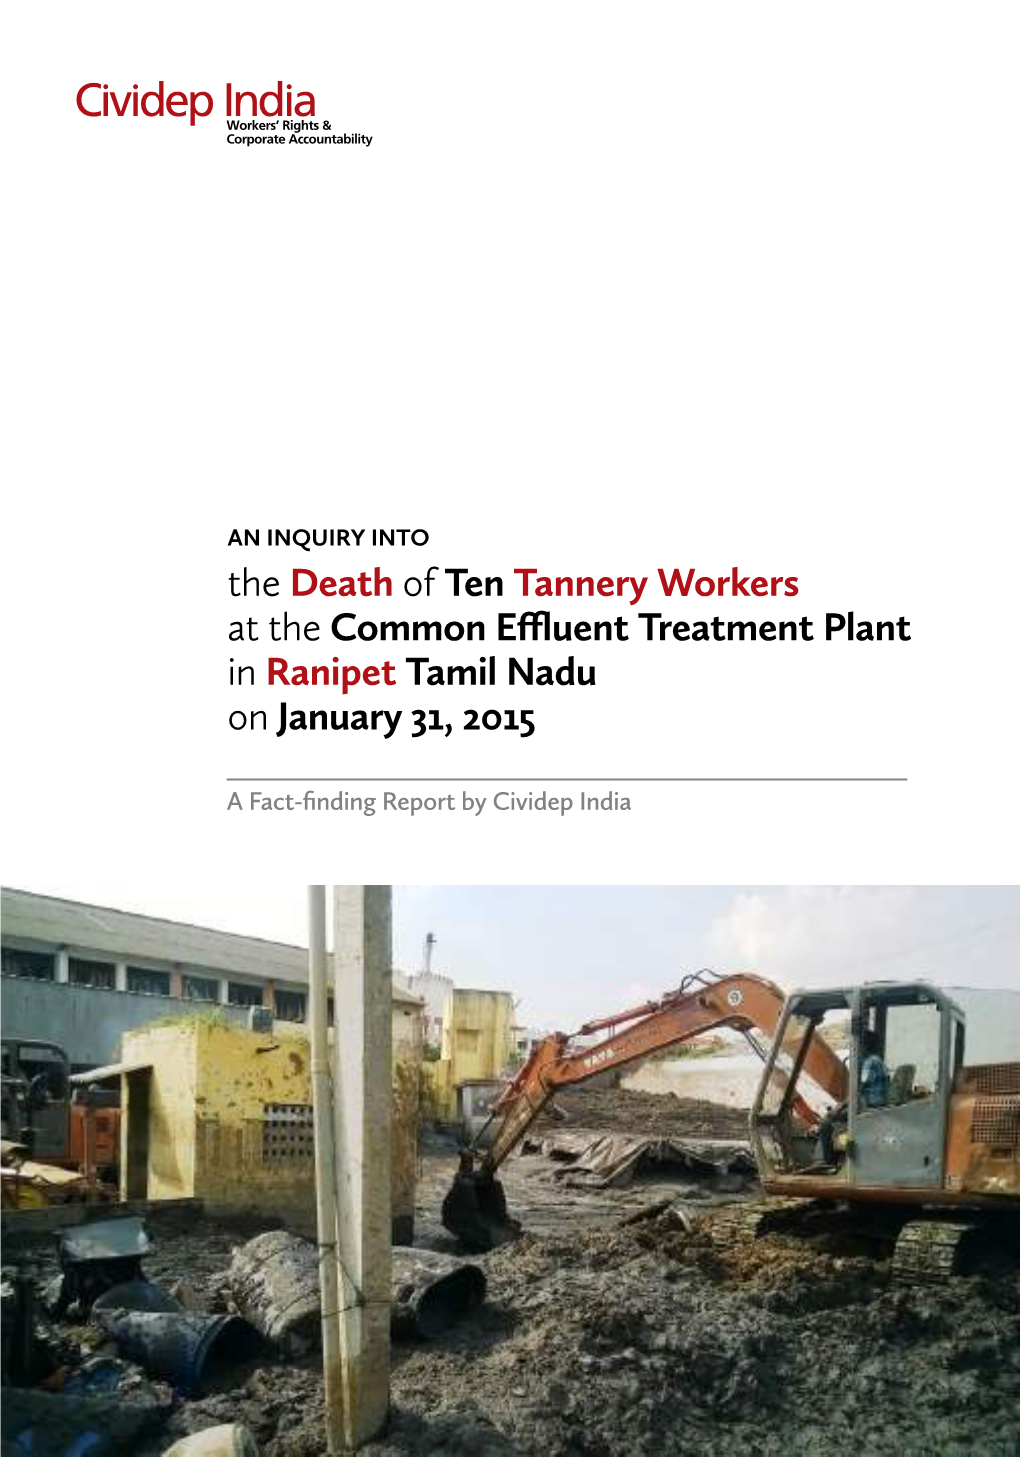 The Death of Ten Tannery Workers at the Common Effluent Treatment Plant in Ranipet Tamil Nadu on January 31, 2015